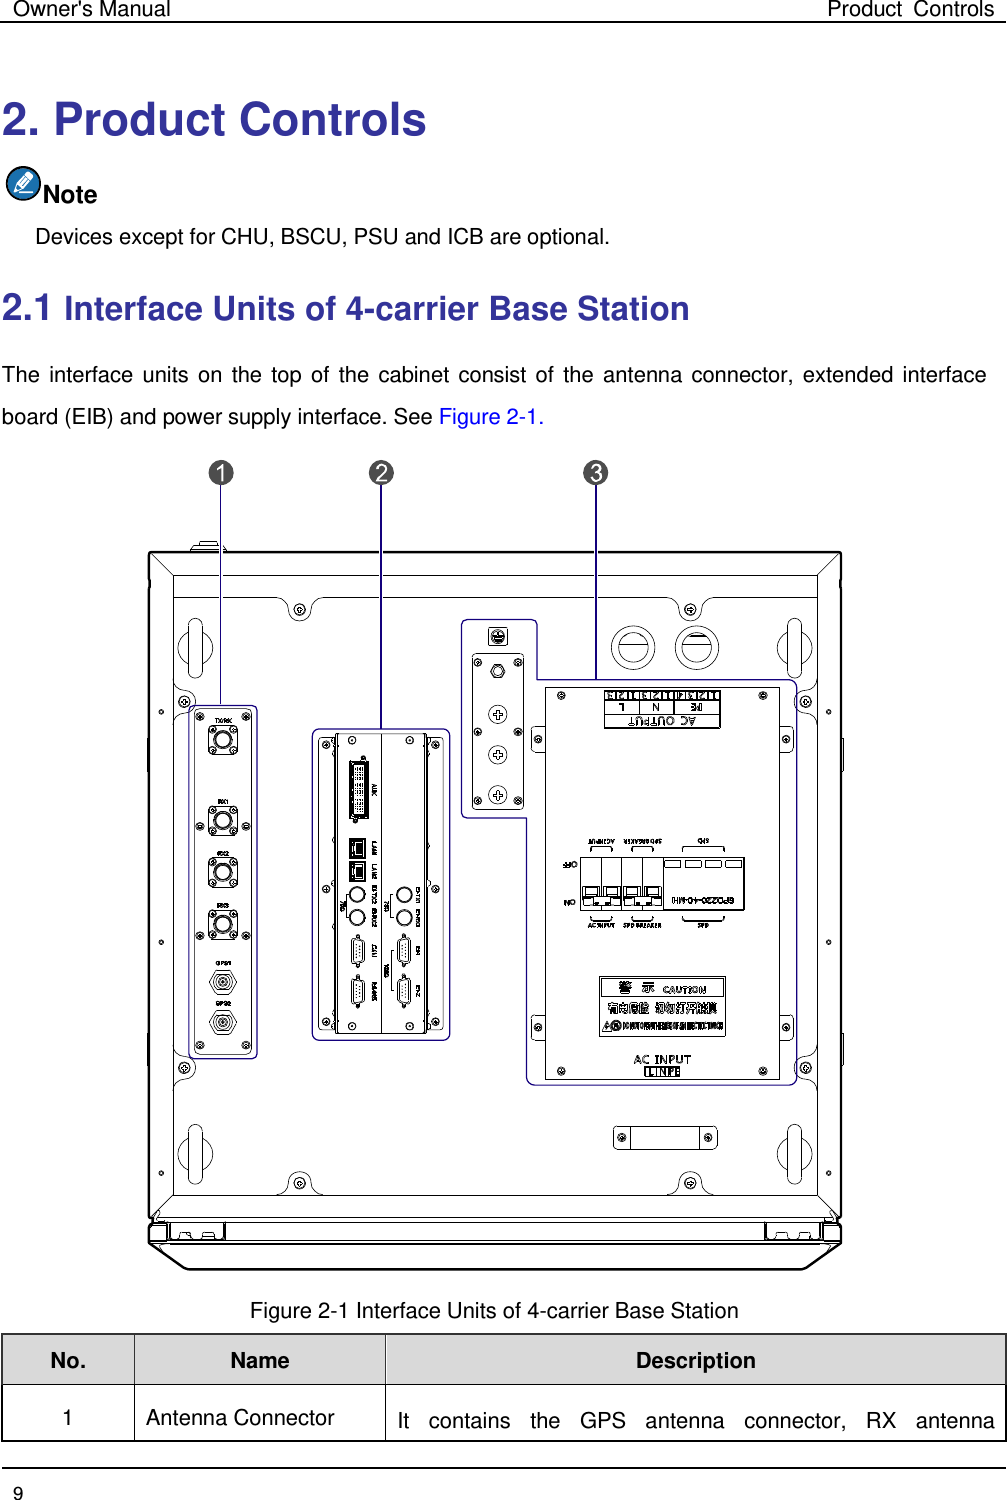 Owner&apos;s Manual Product Controls  9  2. Product Controls Note Devices except for CHU, BSCU, PSU and ICB are optional. 2.1 Interface Units of 4-carrier Base Station   The interface units on the top of the cabinet consist of the antenna connector, extended interface board (EIB) and power supply interface. See Figure 2-1.    Figure 2-1 Interface Units of 4-carrier Base Station No. Name   Description   1  Antenna Connector It contains the GPS antenna connector, RX antenna 